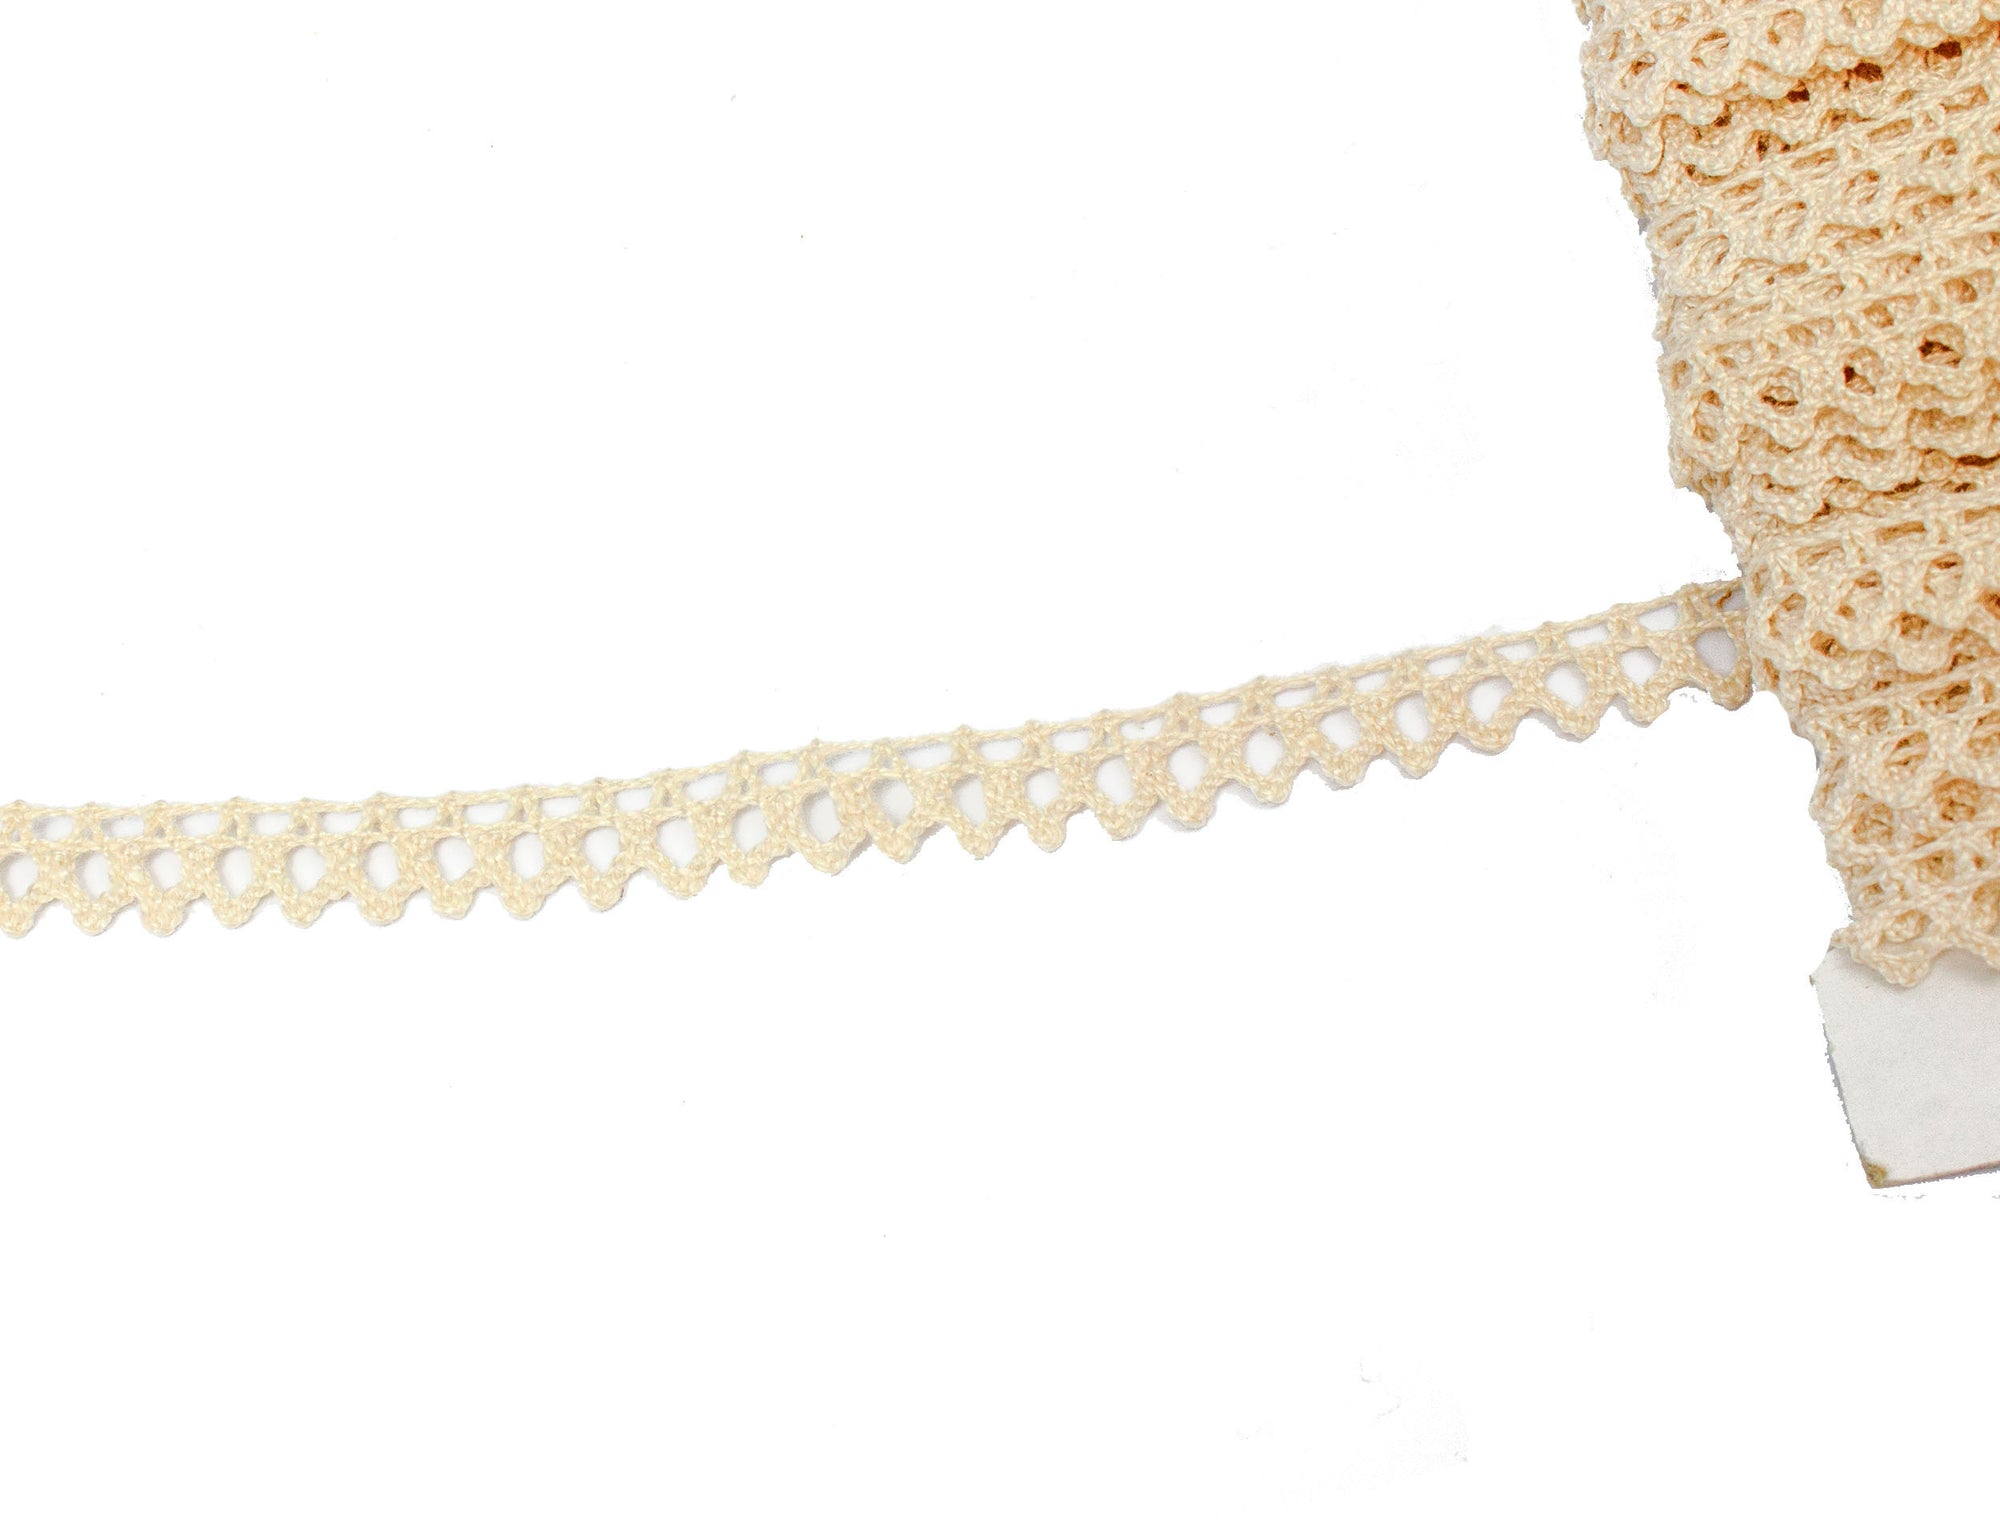 Vintage Crochet Lace Beige Triangle Edge 1/2" Wide - Sold by the Yard